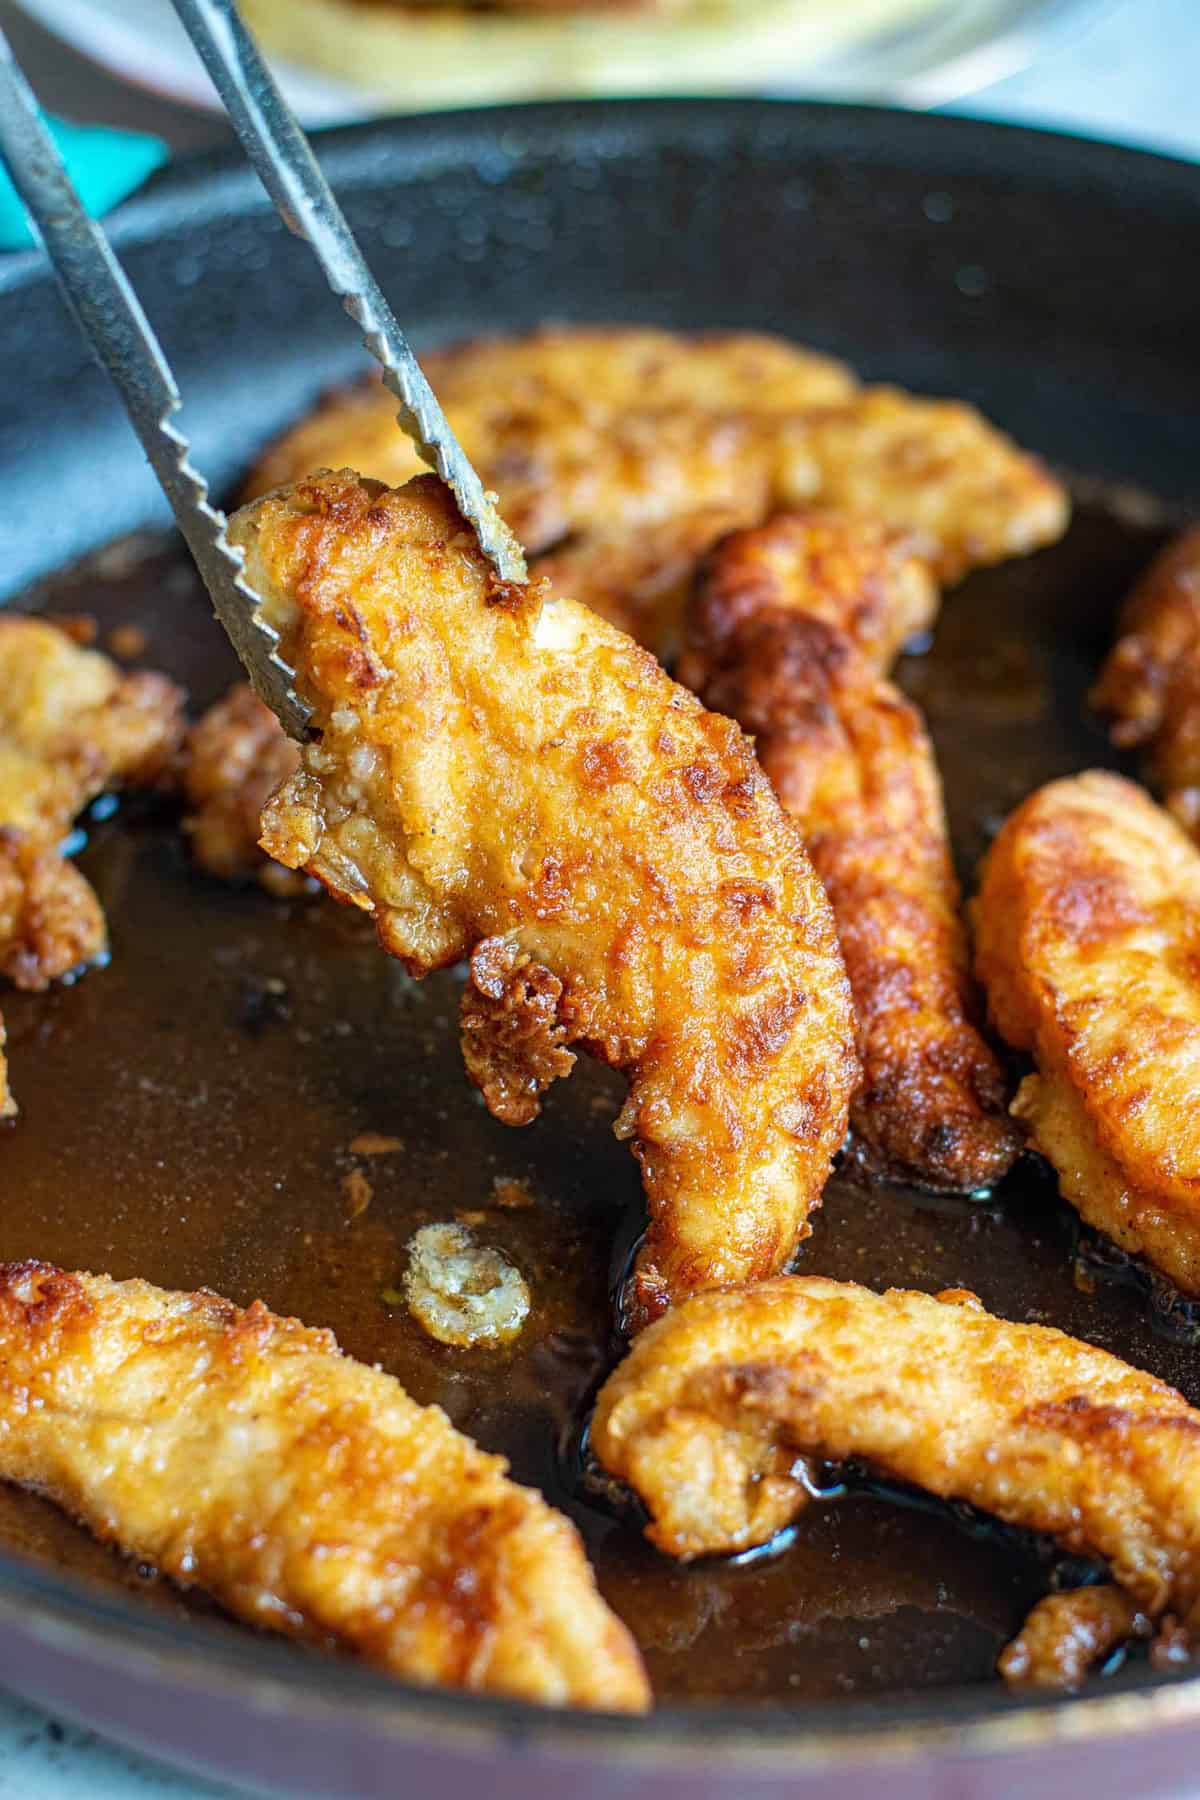 Fried chicken being taken out of a pan on tongs.